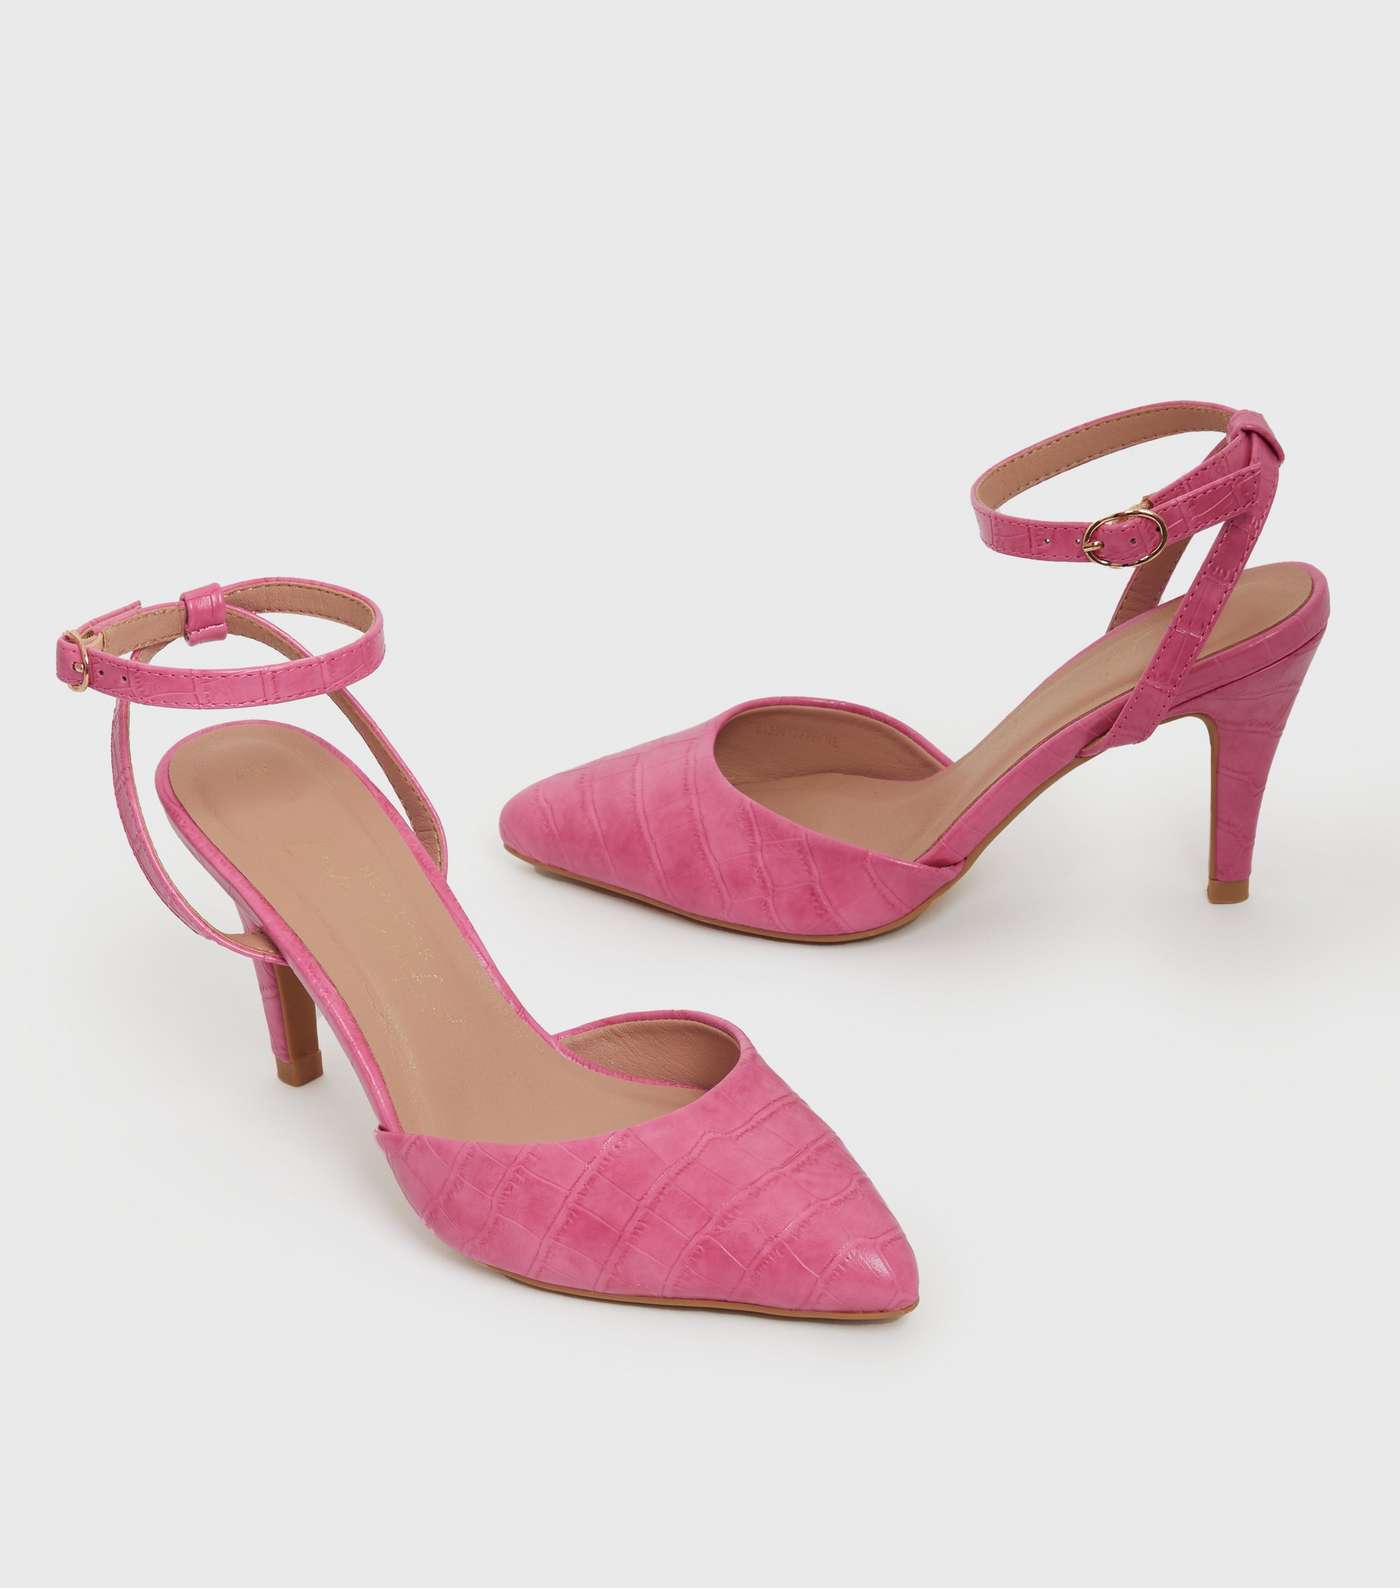 Wide Fit Bright Pink Pointed Stiletto Heel Court Shoes Image 3